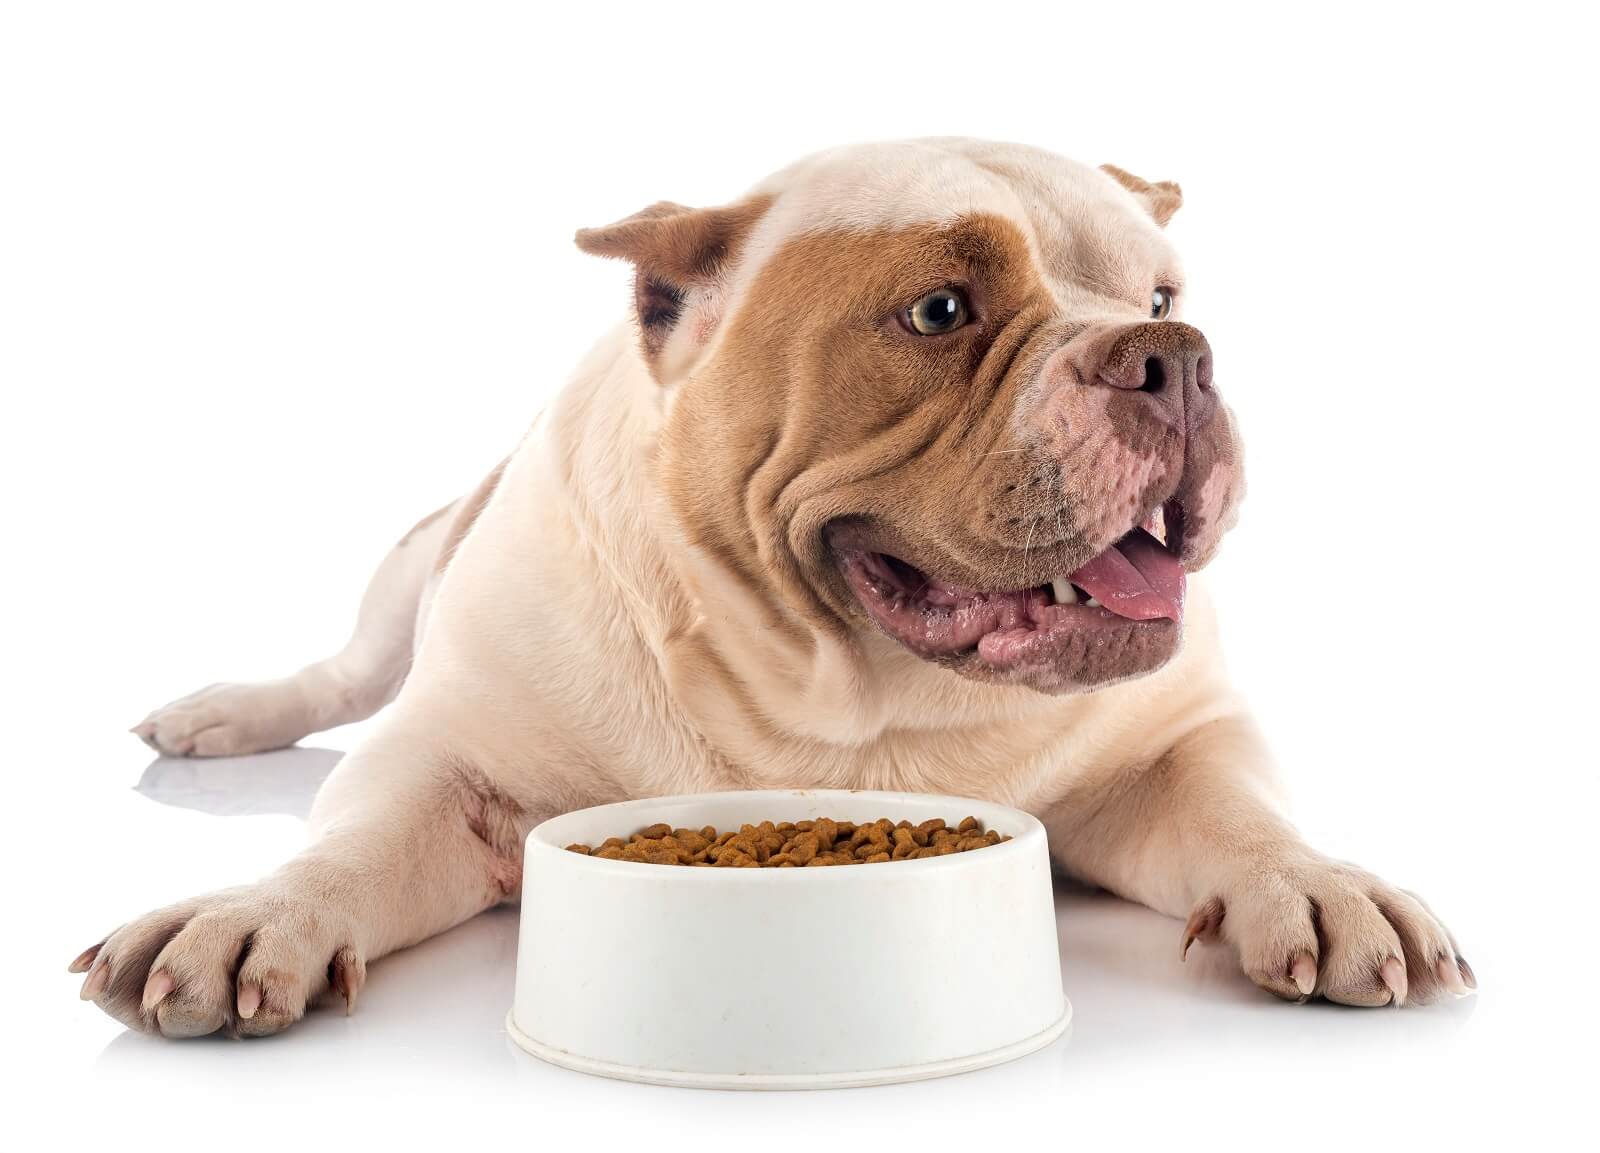 How To Add Calories To Your Dog’s Diet